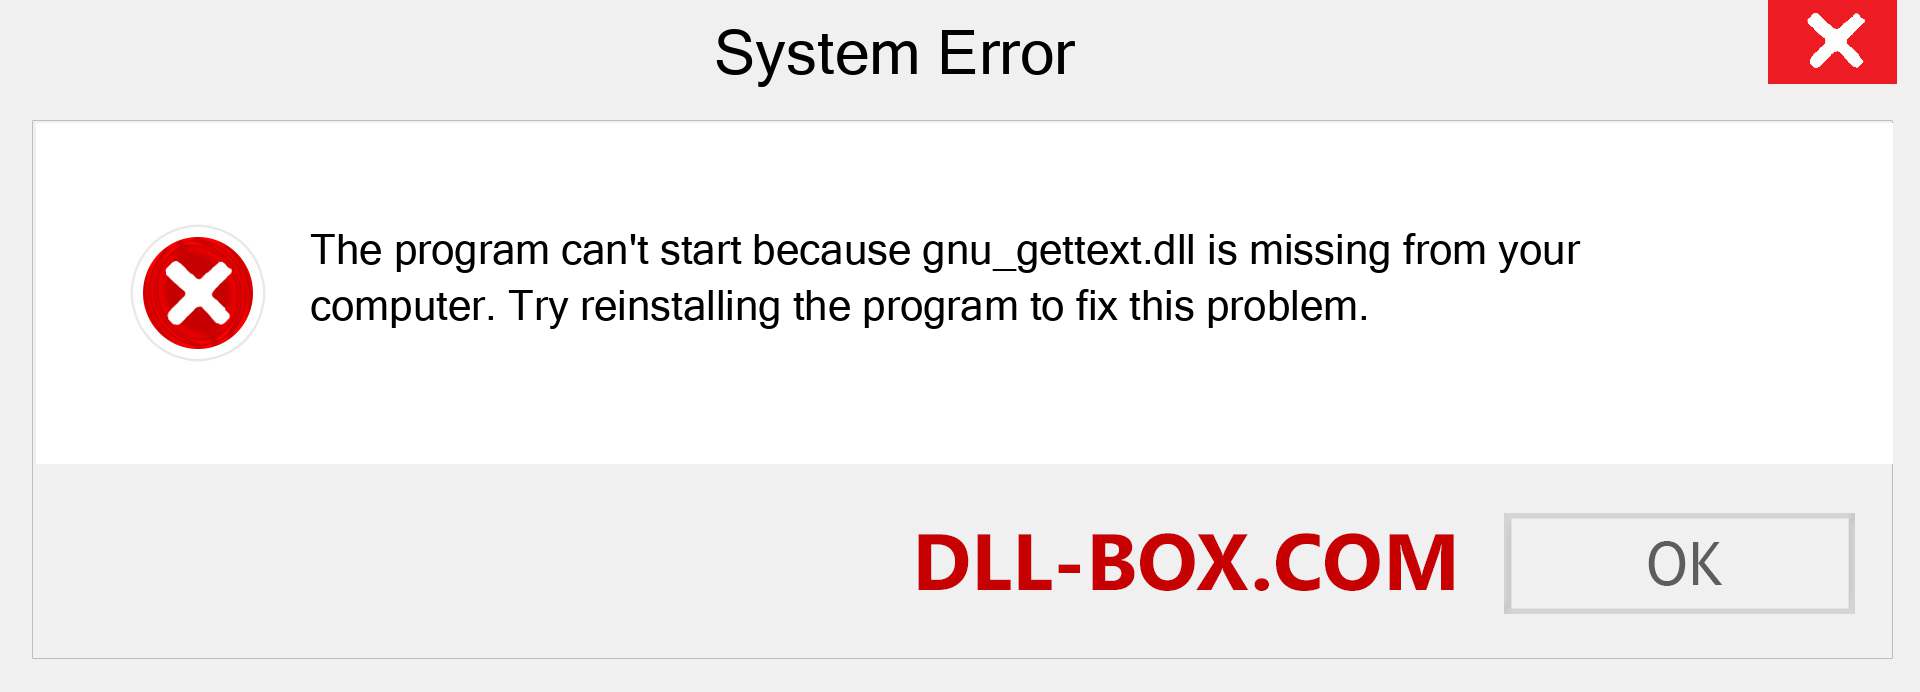  gnu_gettext.dll file is missing?. Download for Windows 7, 8, 10 - Fix  gnu_gettext dll Missing Error on Windows, photos, images